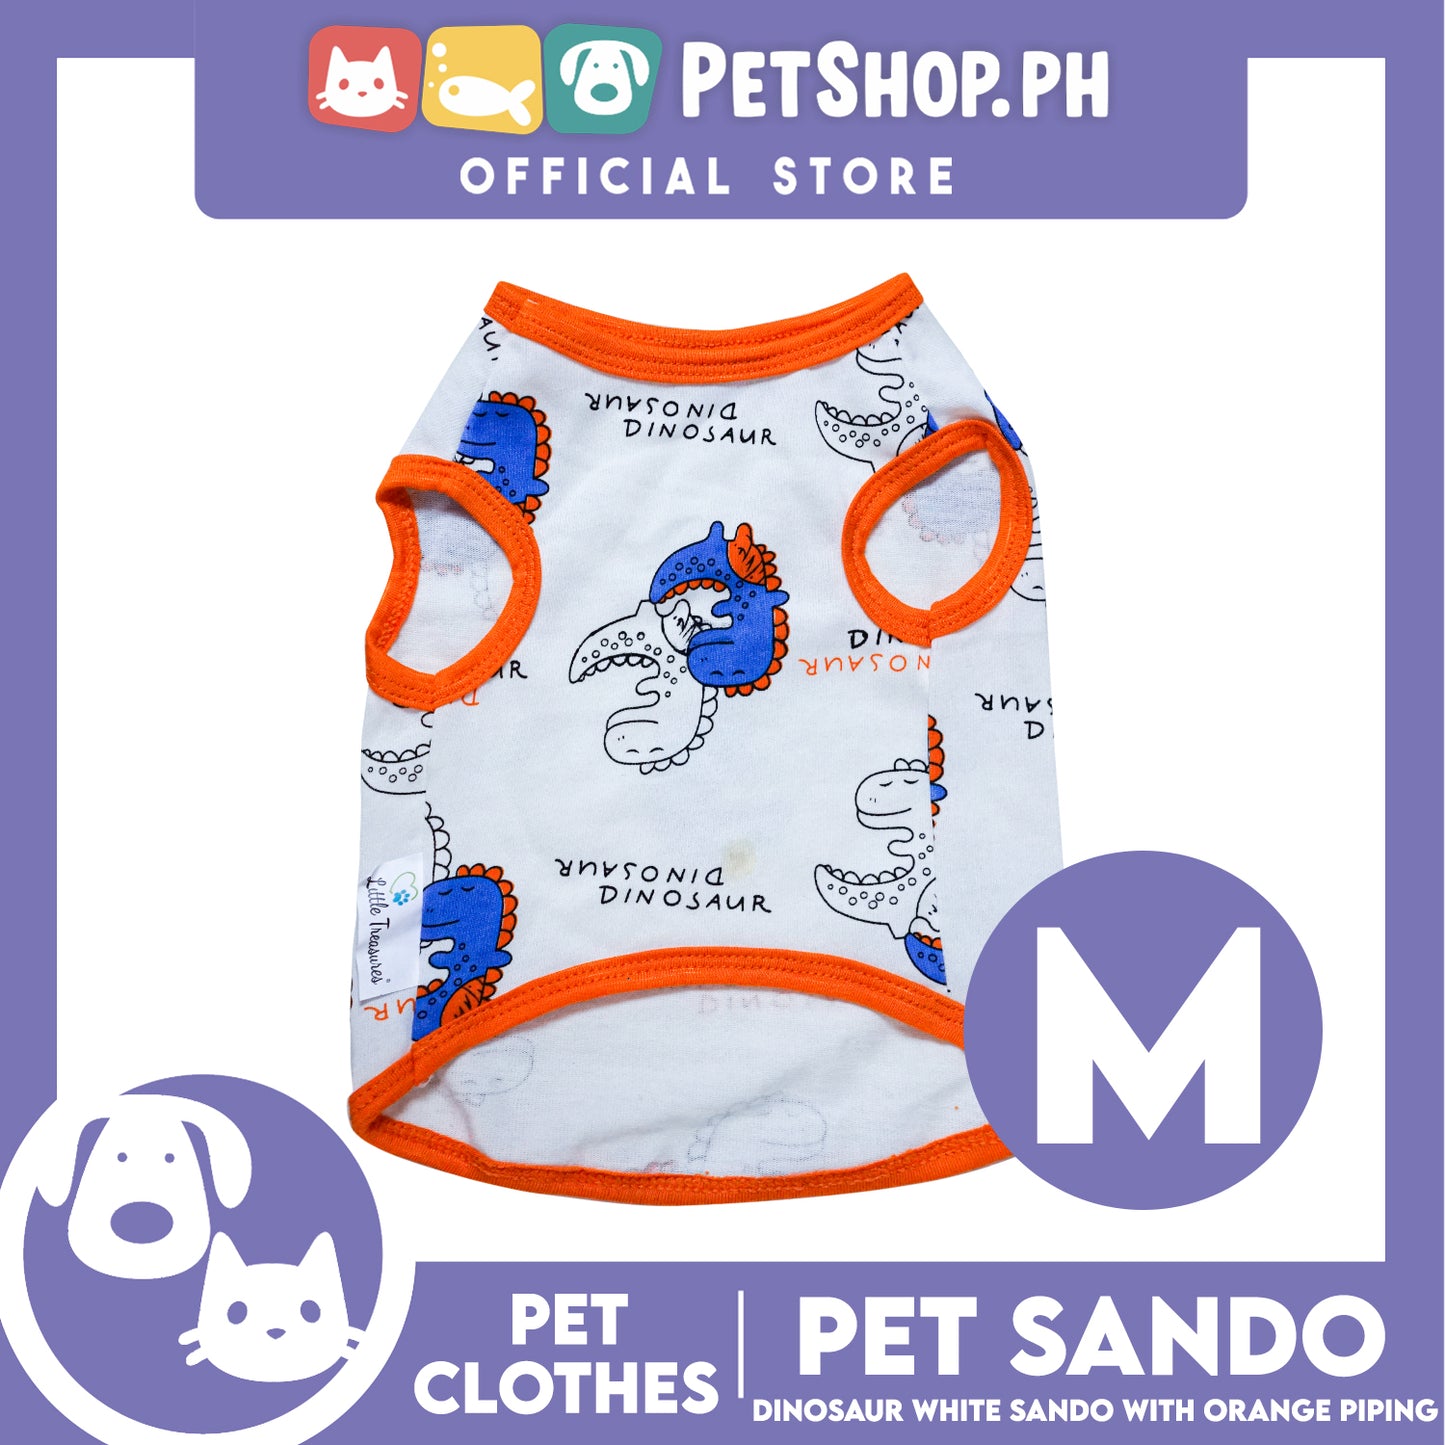 Pet Sando Dinosaur White with Orange Piping Sando (Medium) Perfect Fit for Dogs and Cats